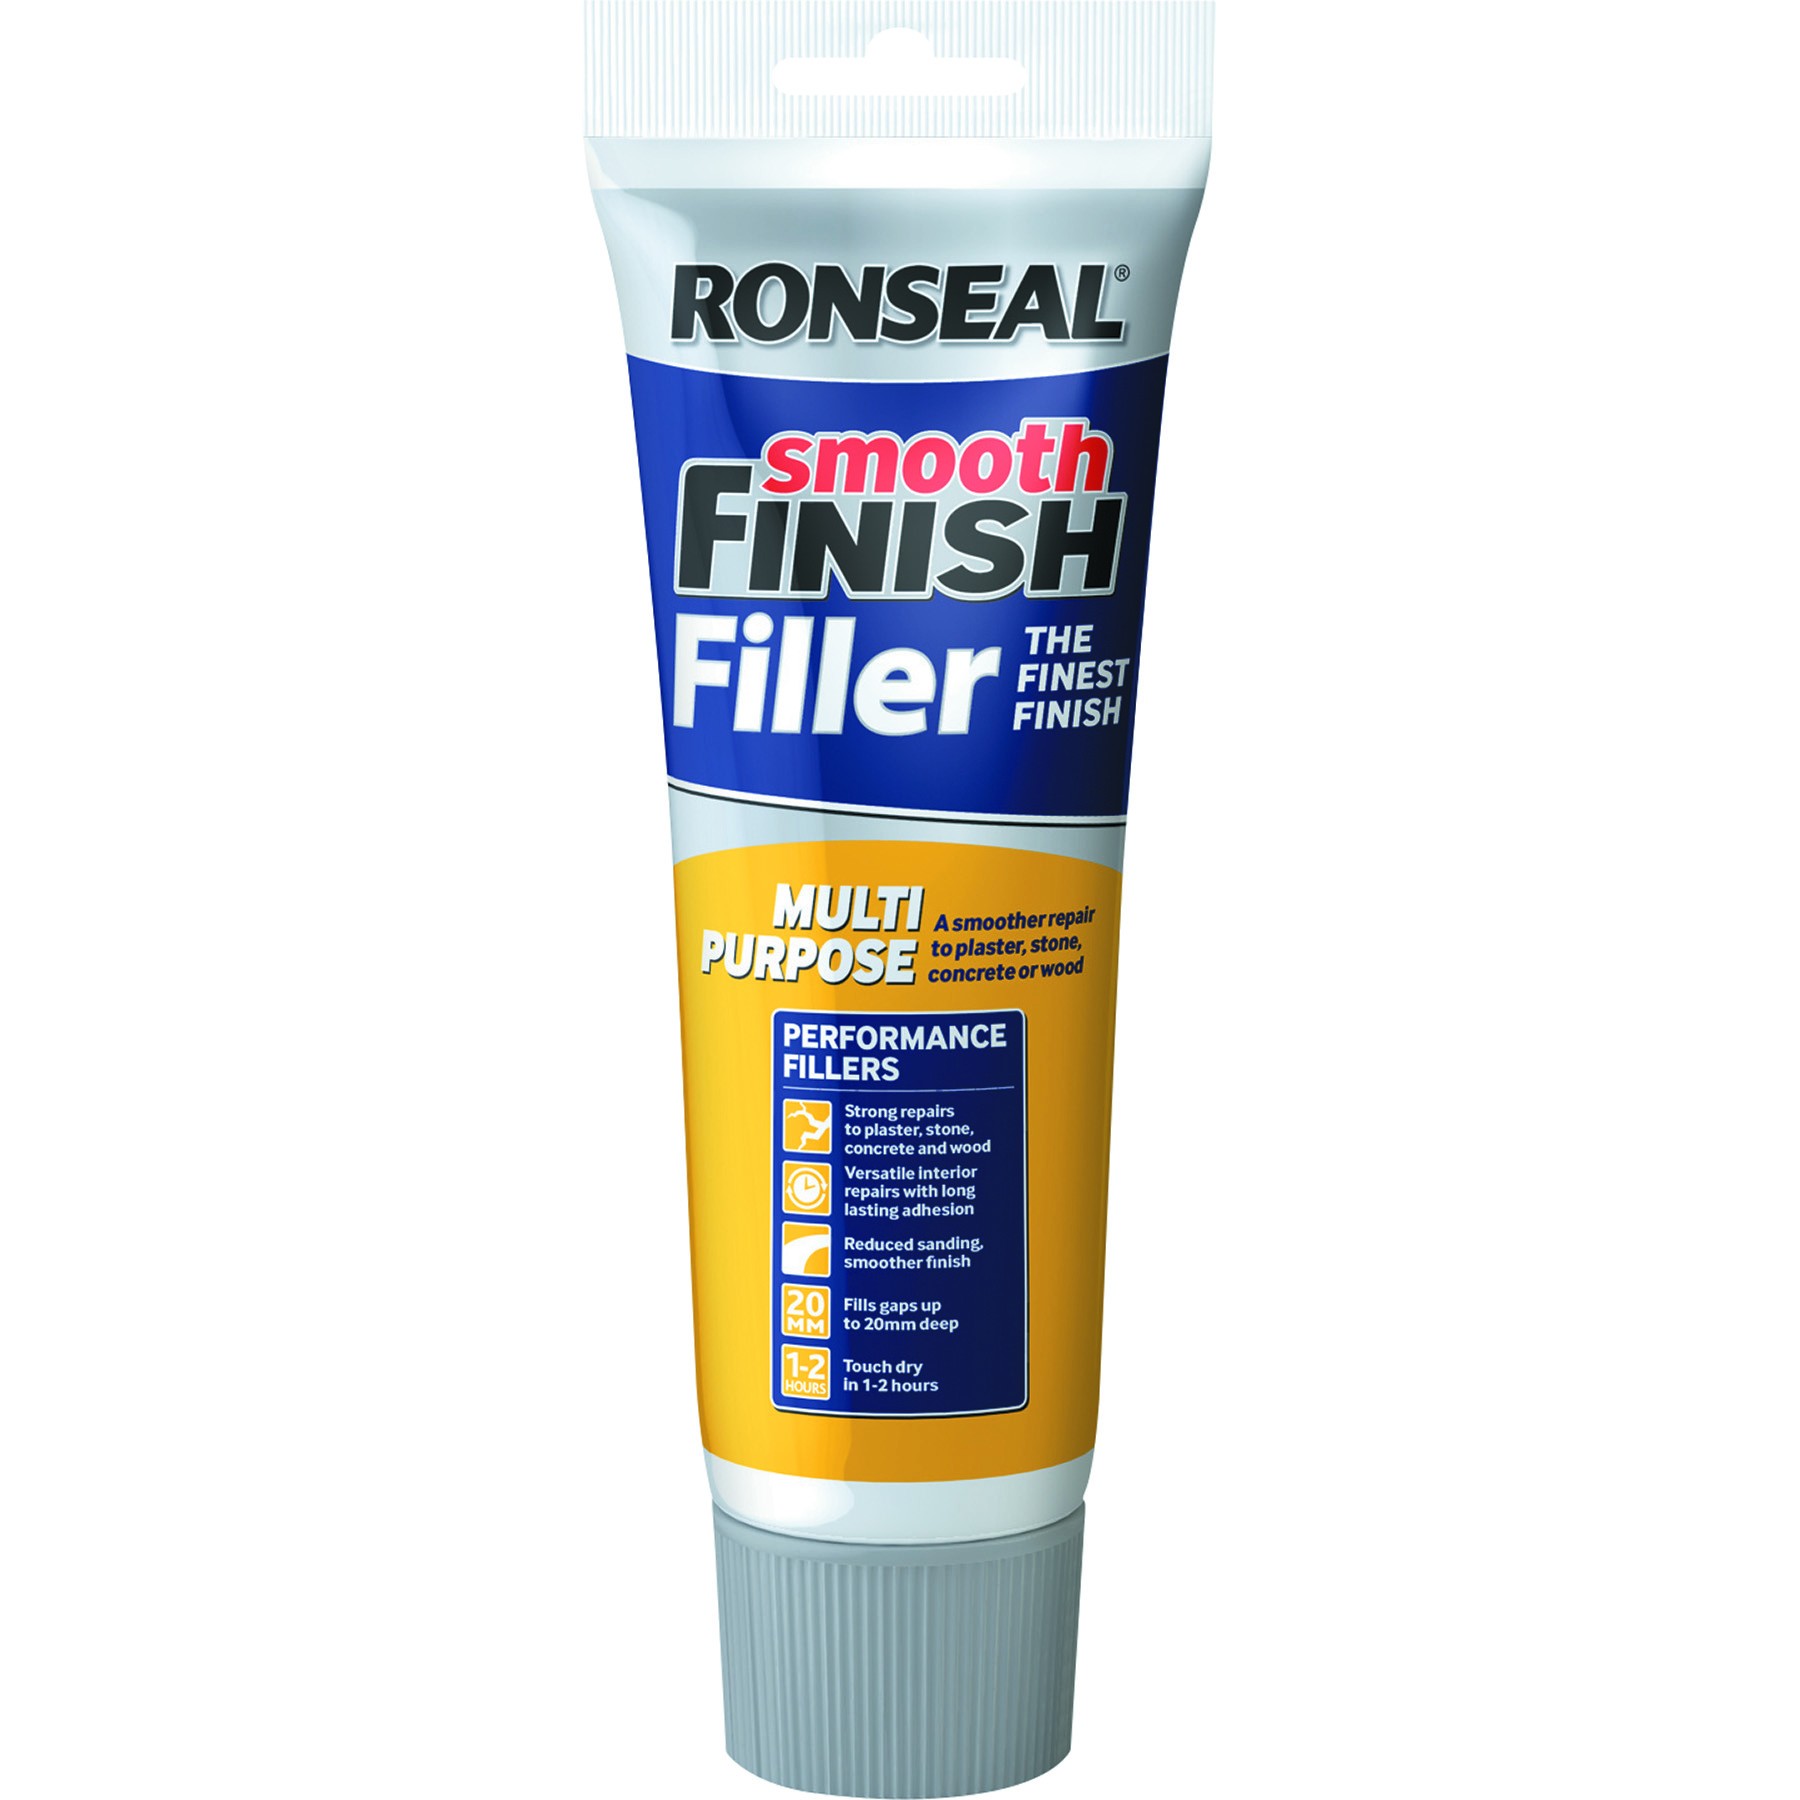 Ronseal Smooth Finish Multi Purpose Ready Mix Wall Filler 600g + 50% [RONS36545]